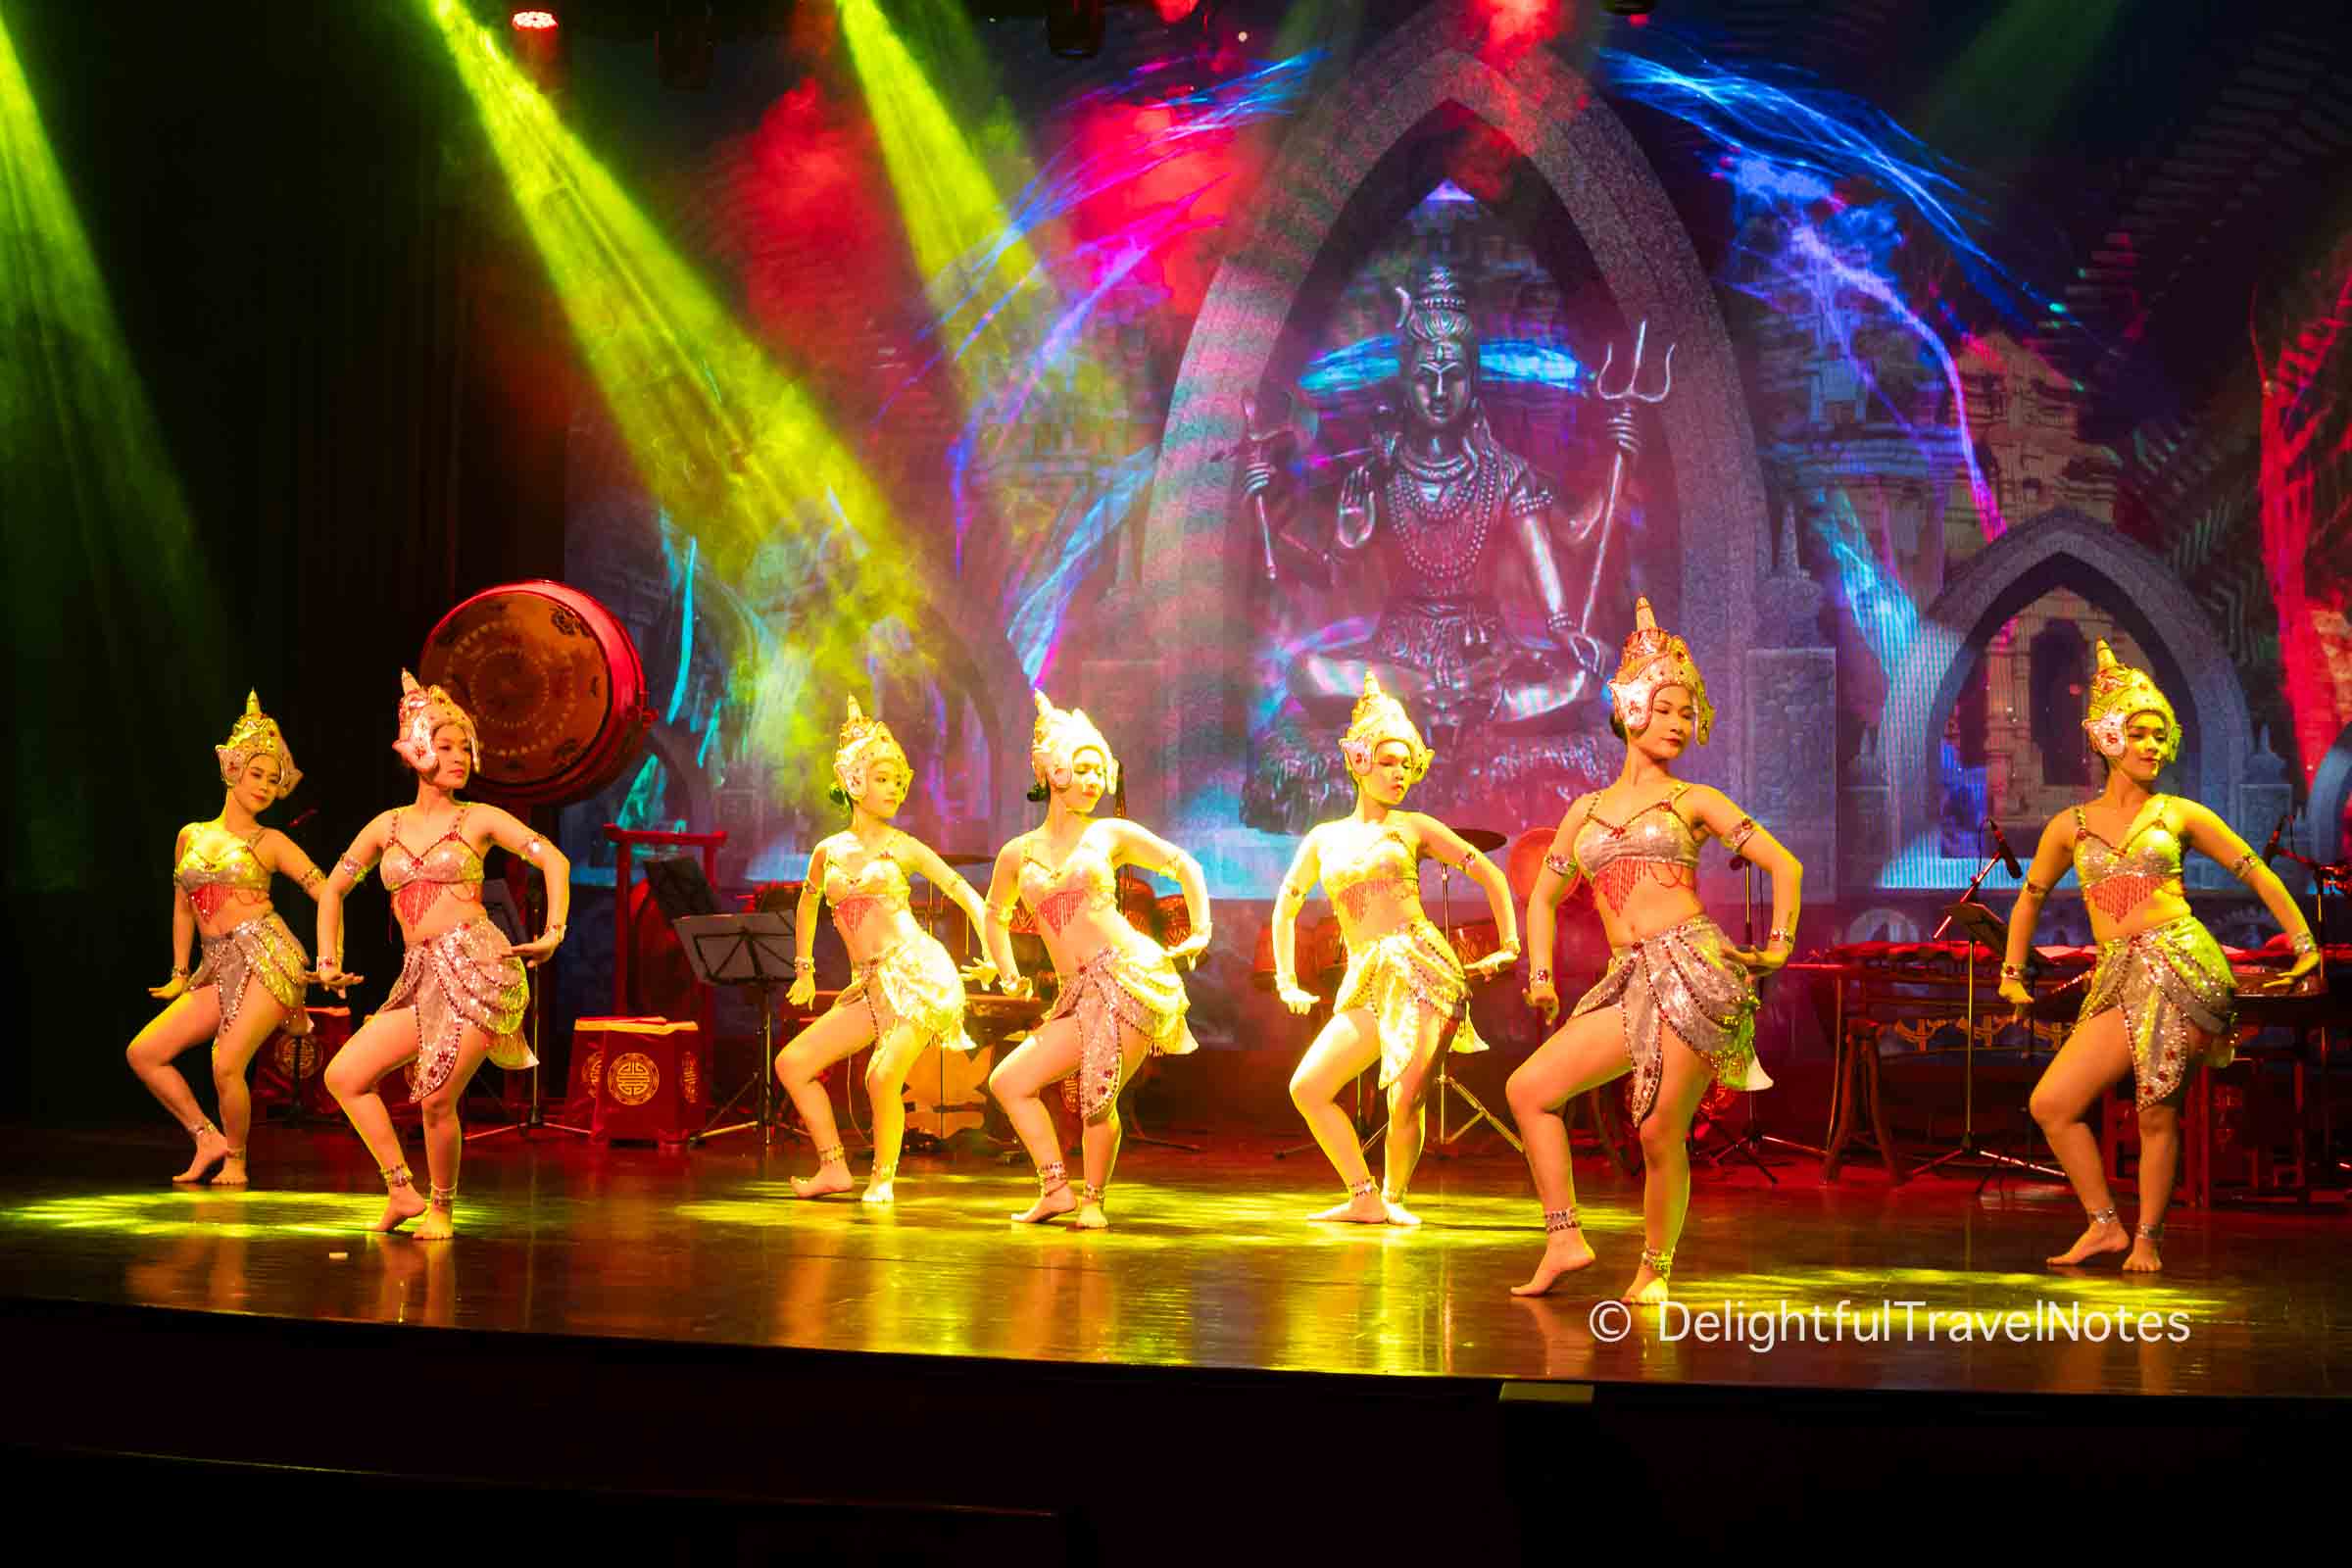 dancers performing a Champa dance on the stage at Nguyen Hien Dinh Theater in Da Nang.